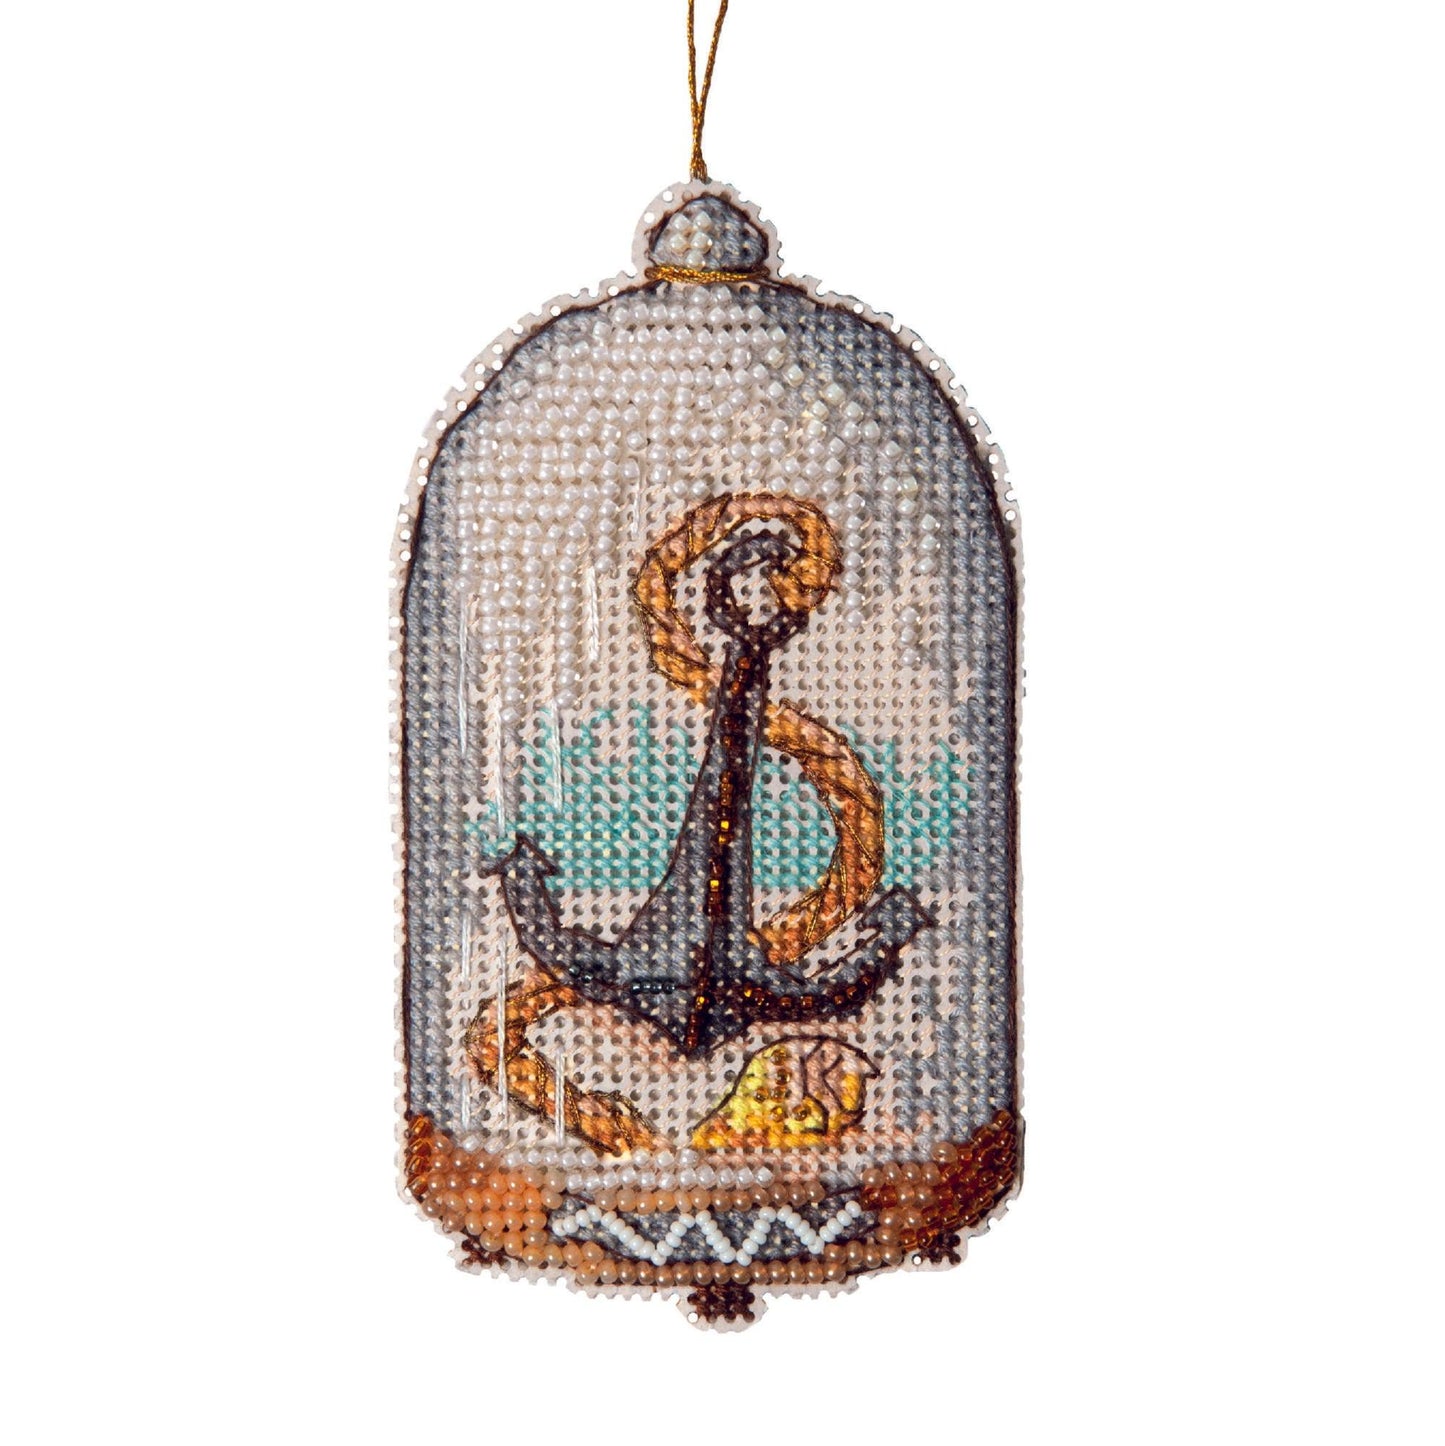 ANCHOR "In search of treasures series", Counted Cross Stitch Kit, 14 count plastic canvas, size 6,5 x 11 cm, CRYSTAL ART (T-88) - Leo Hobby